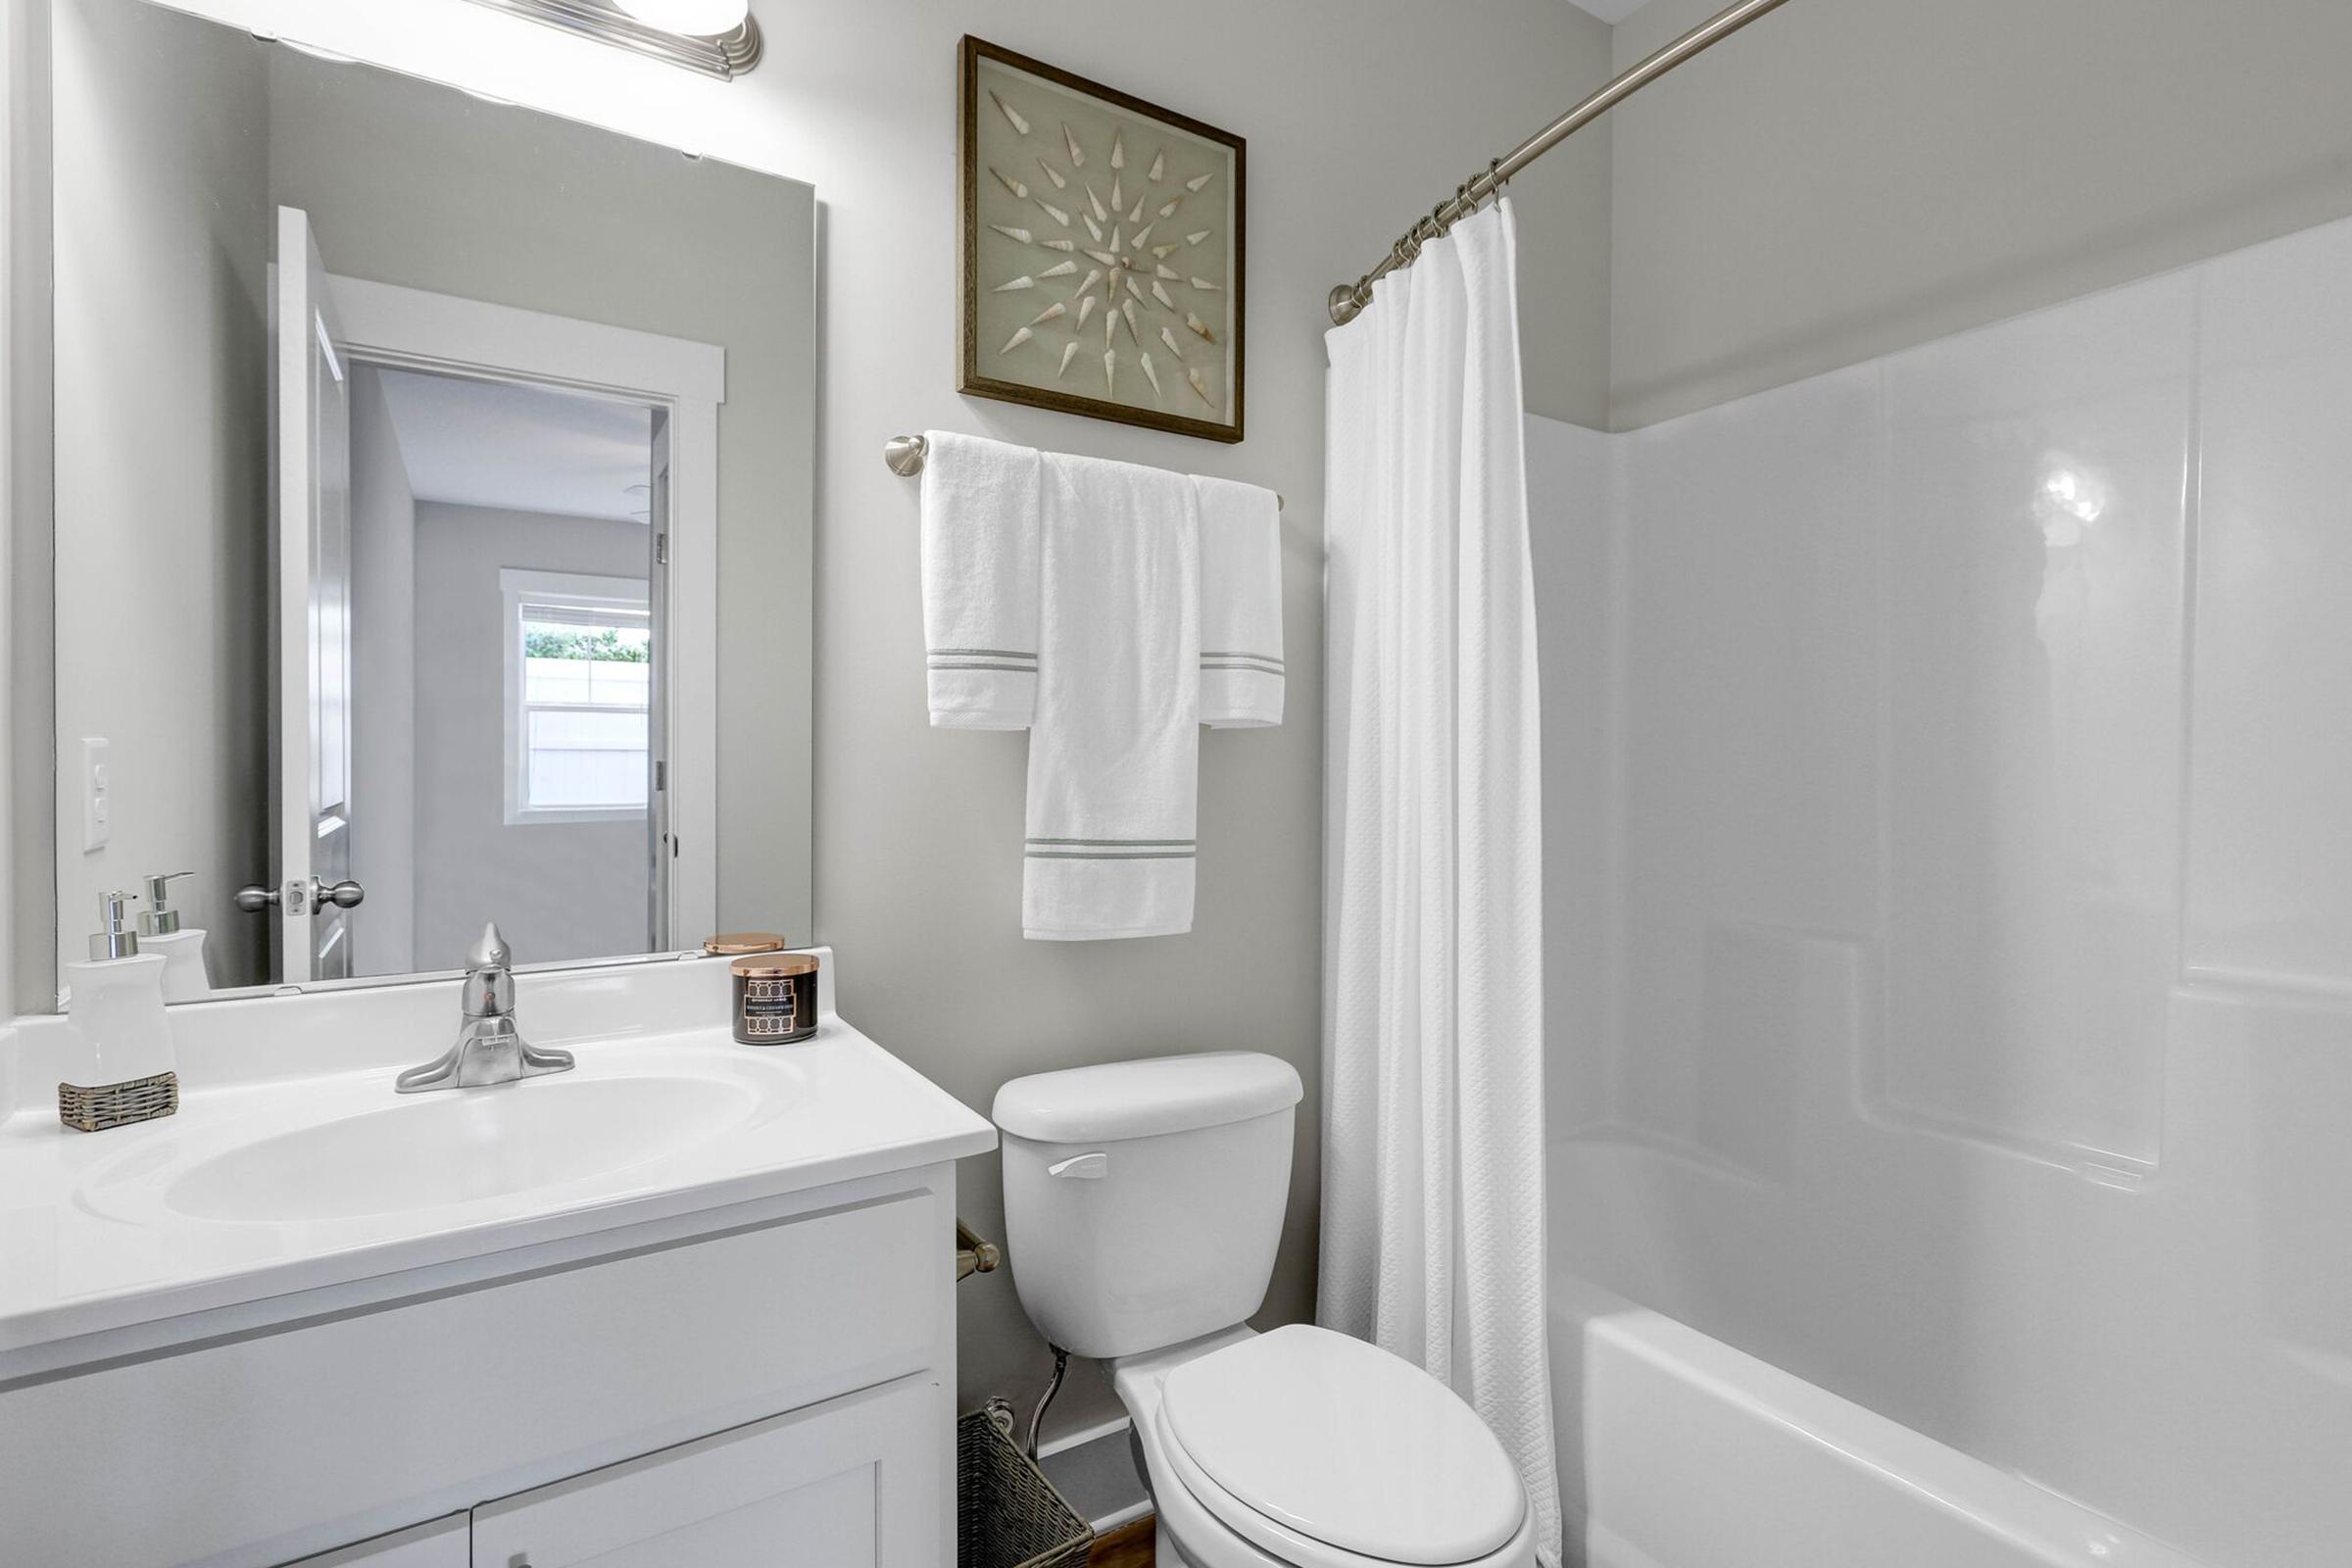 Modern bathrooms at The Townhomes at Beau Rivage in Wilmington, NC.